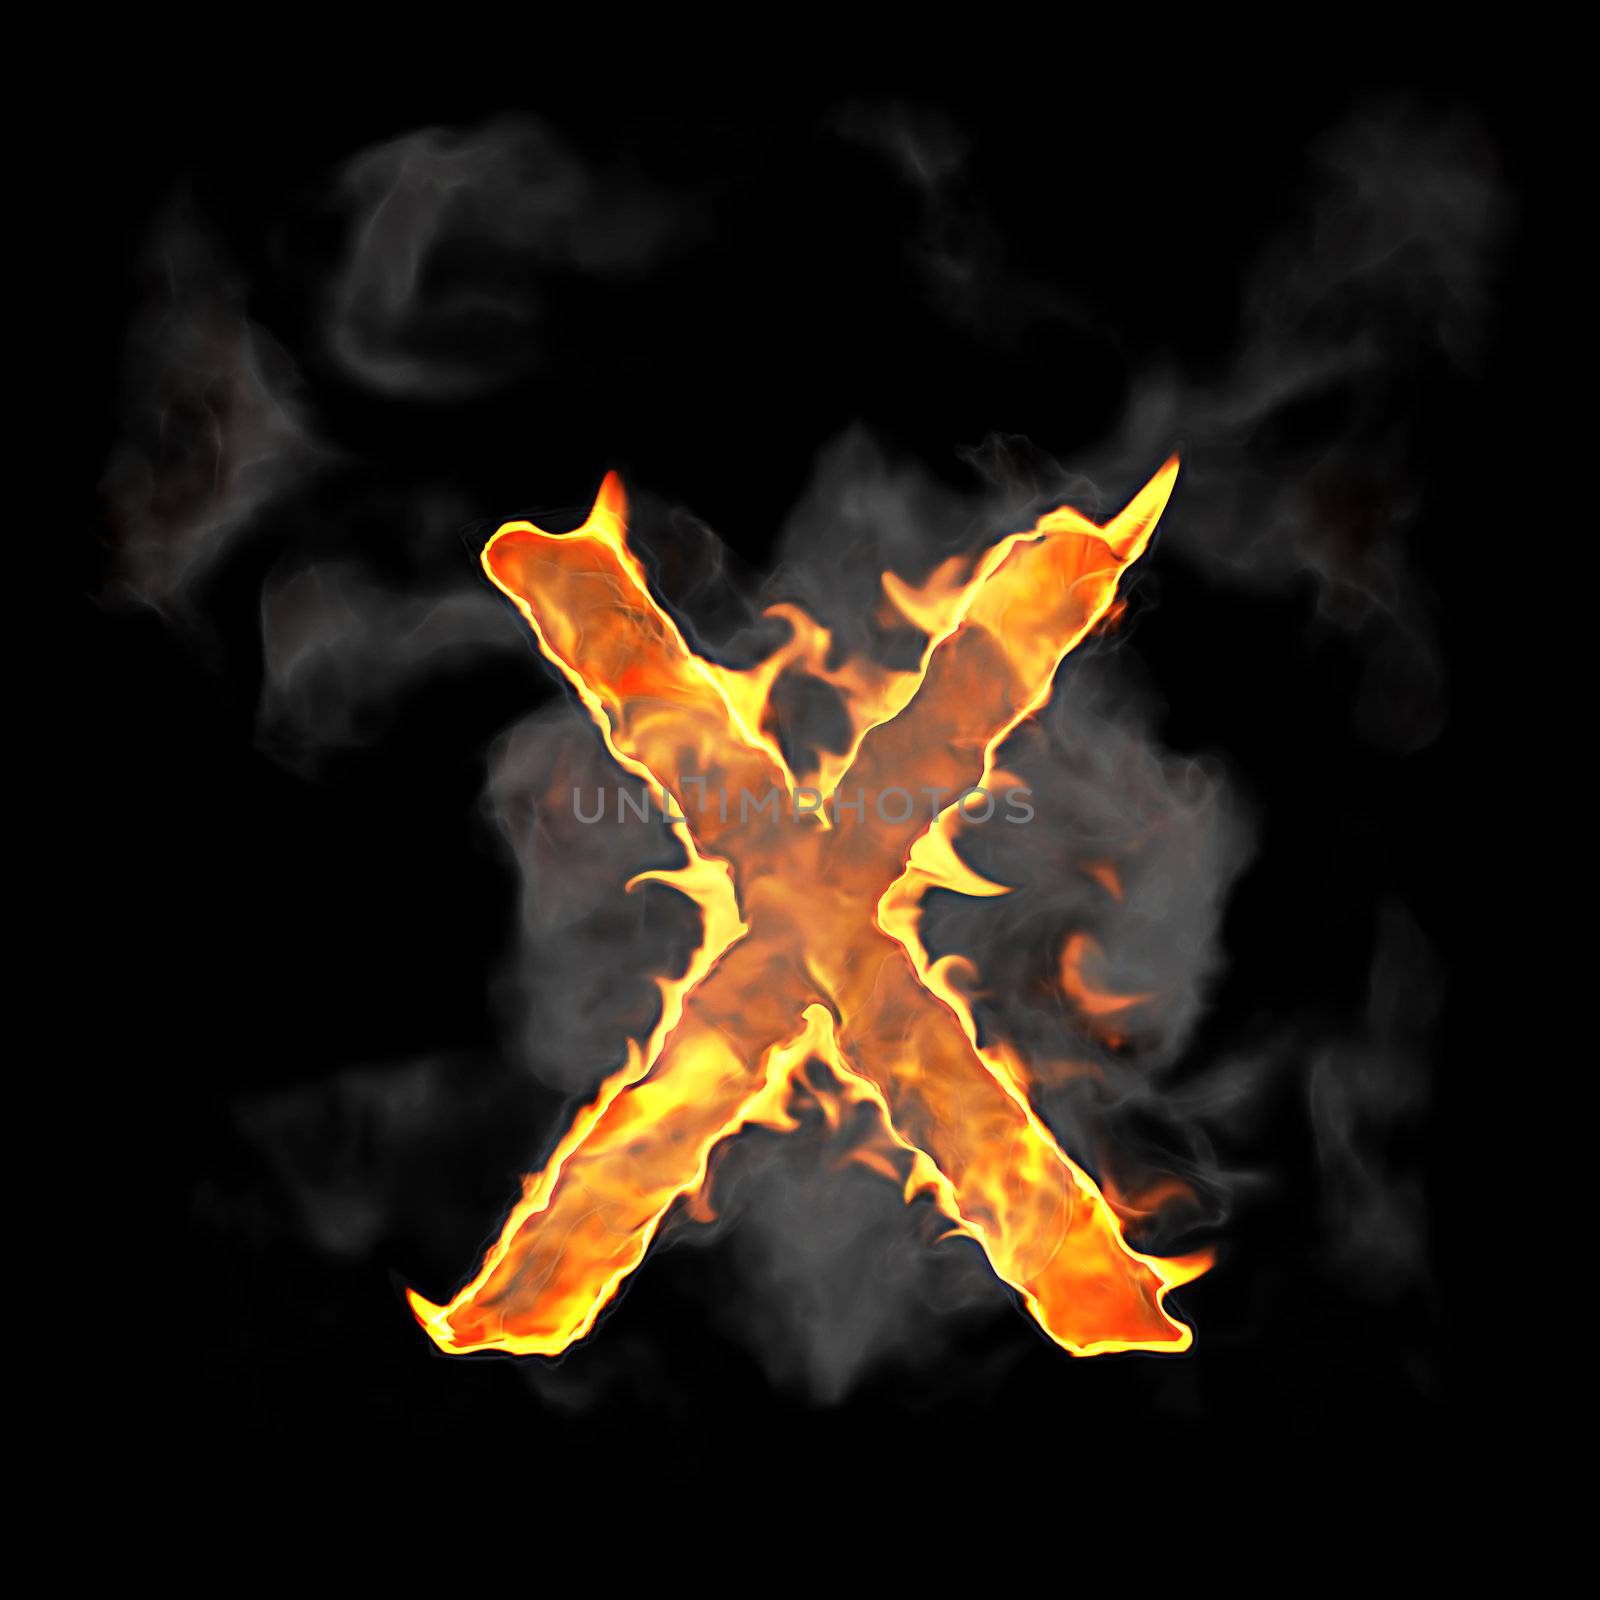 Burning and flame font X letter over black background